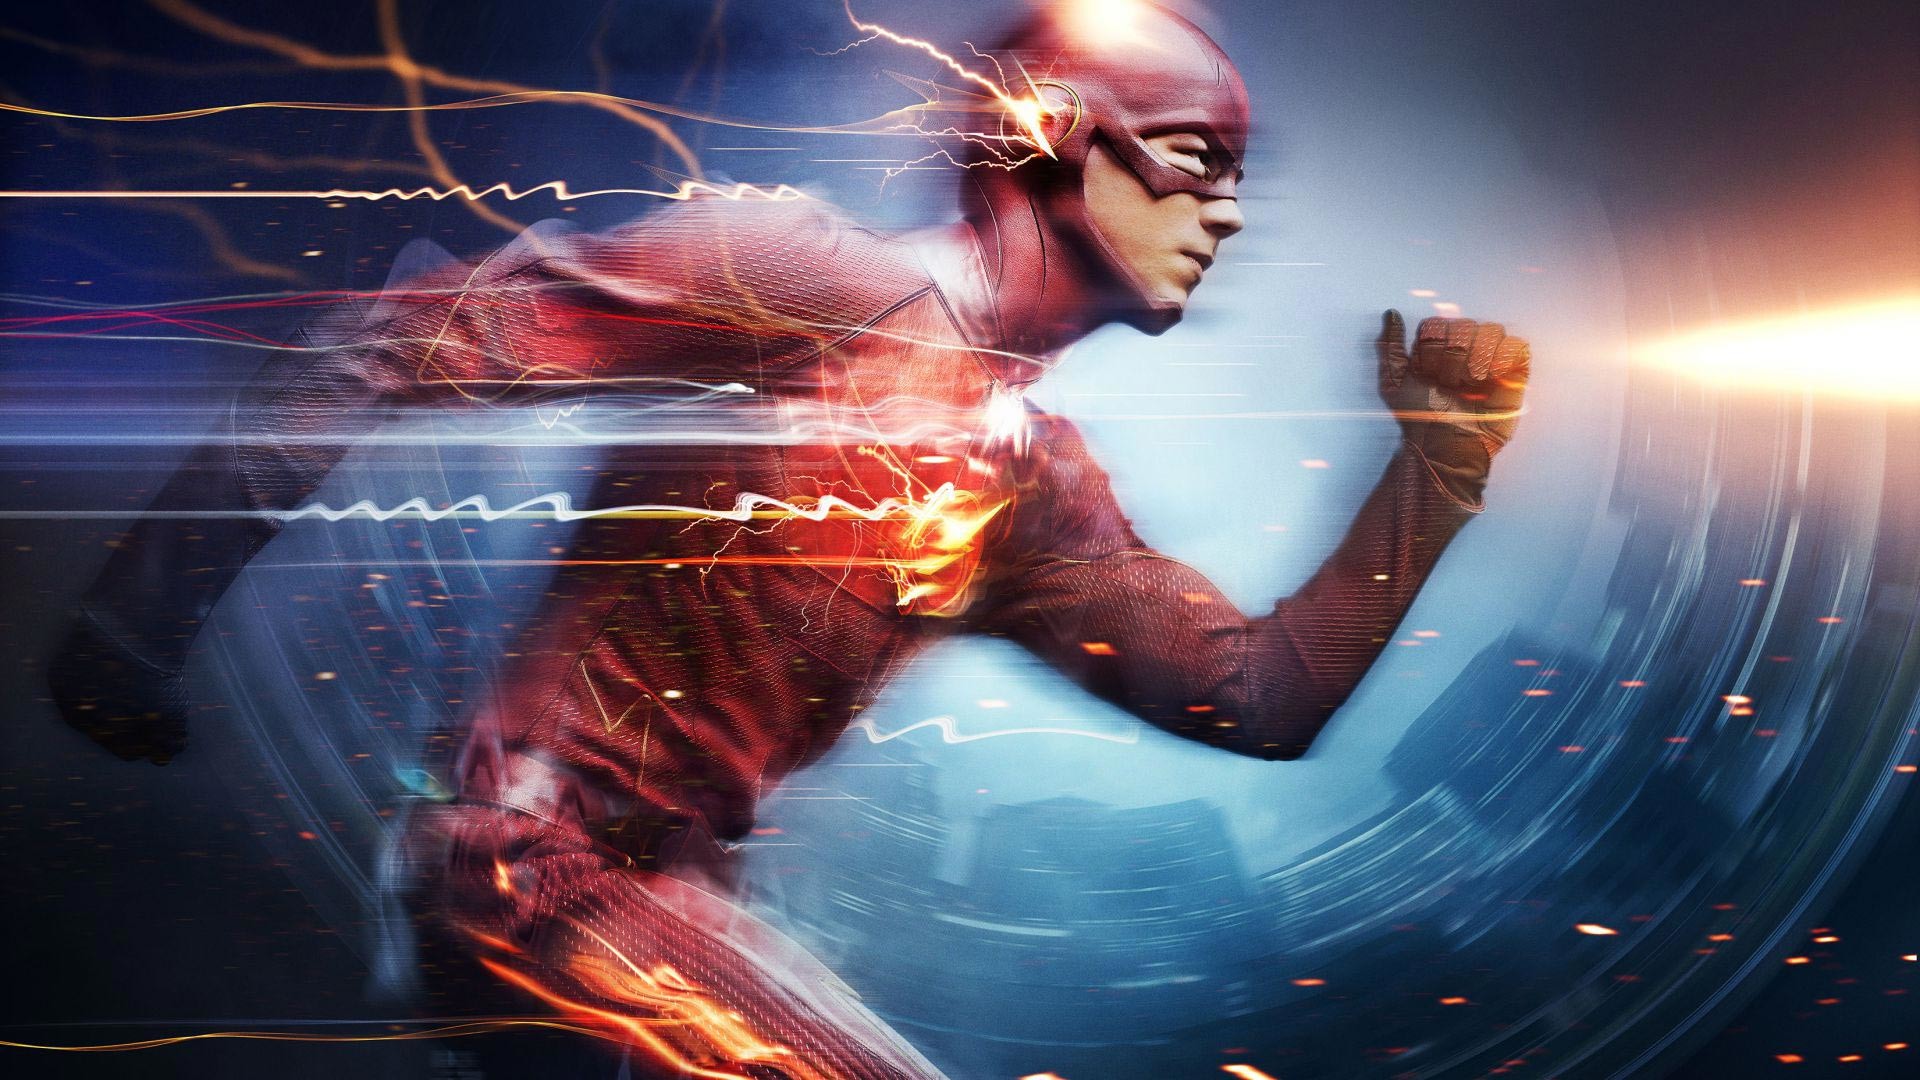 1920x1080 ... Barry Allen as The Flash, the fastest man alive, blitzing through the  city using the Speed Force. Also features a cameo from the Reverse Flash,  Zoom.